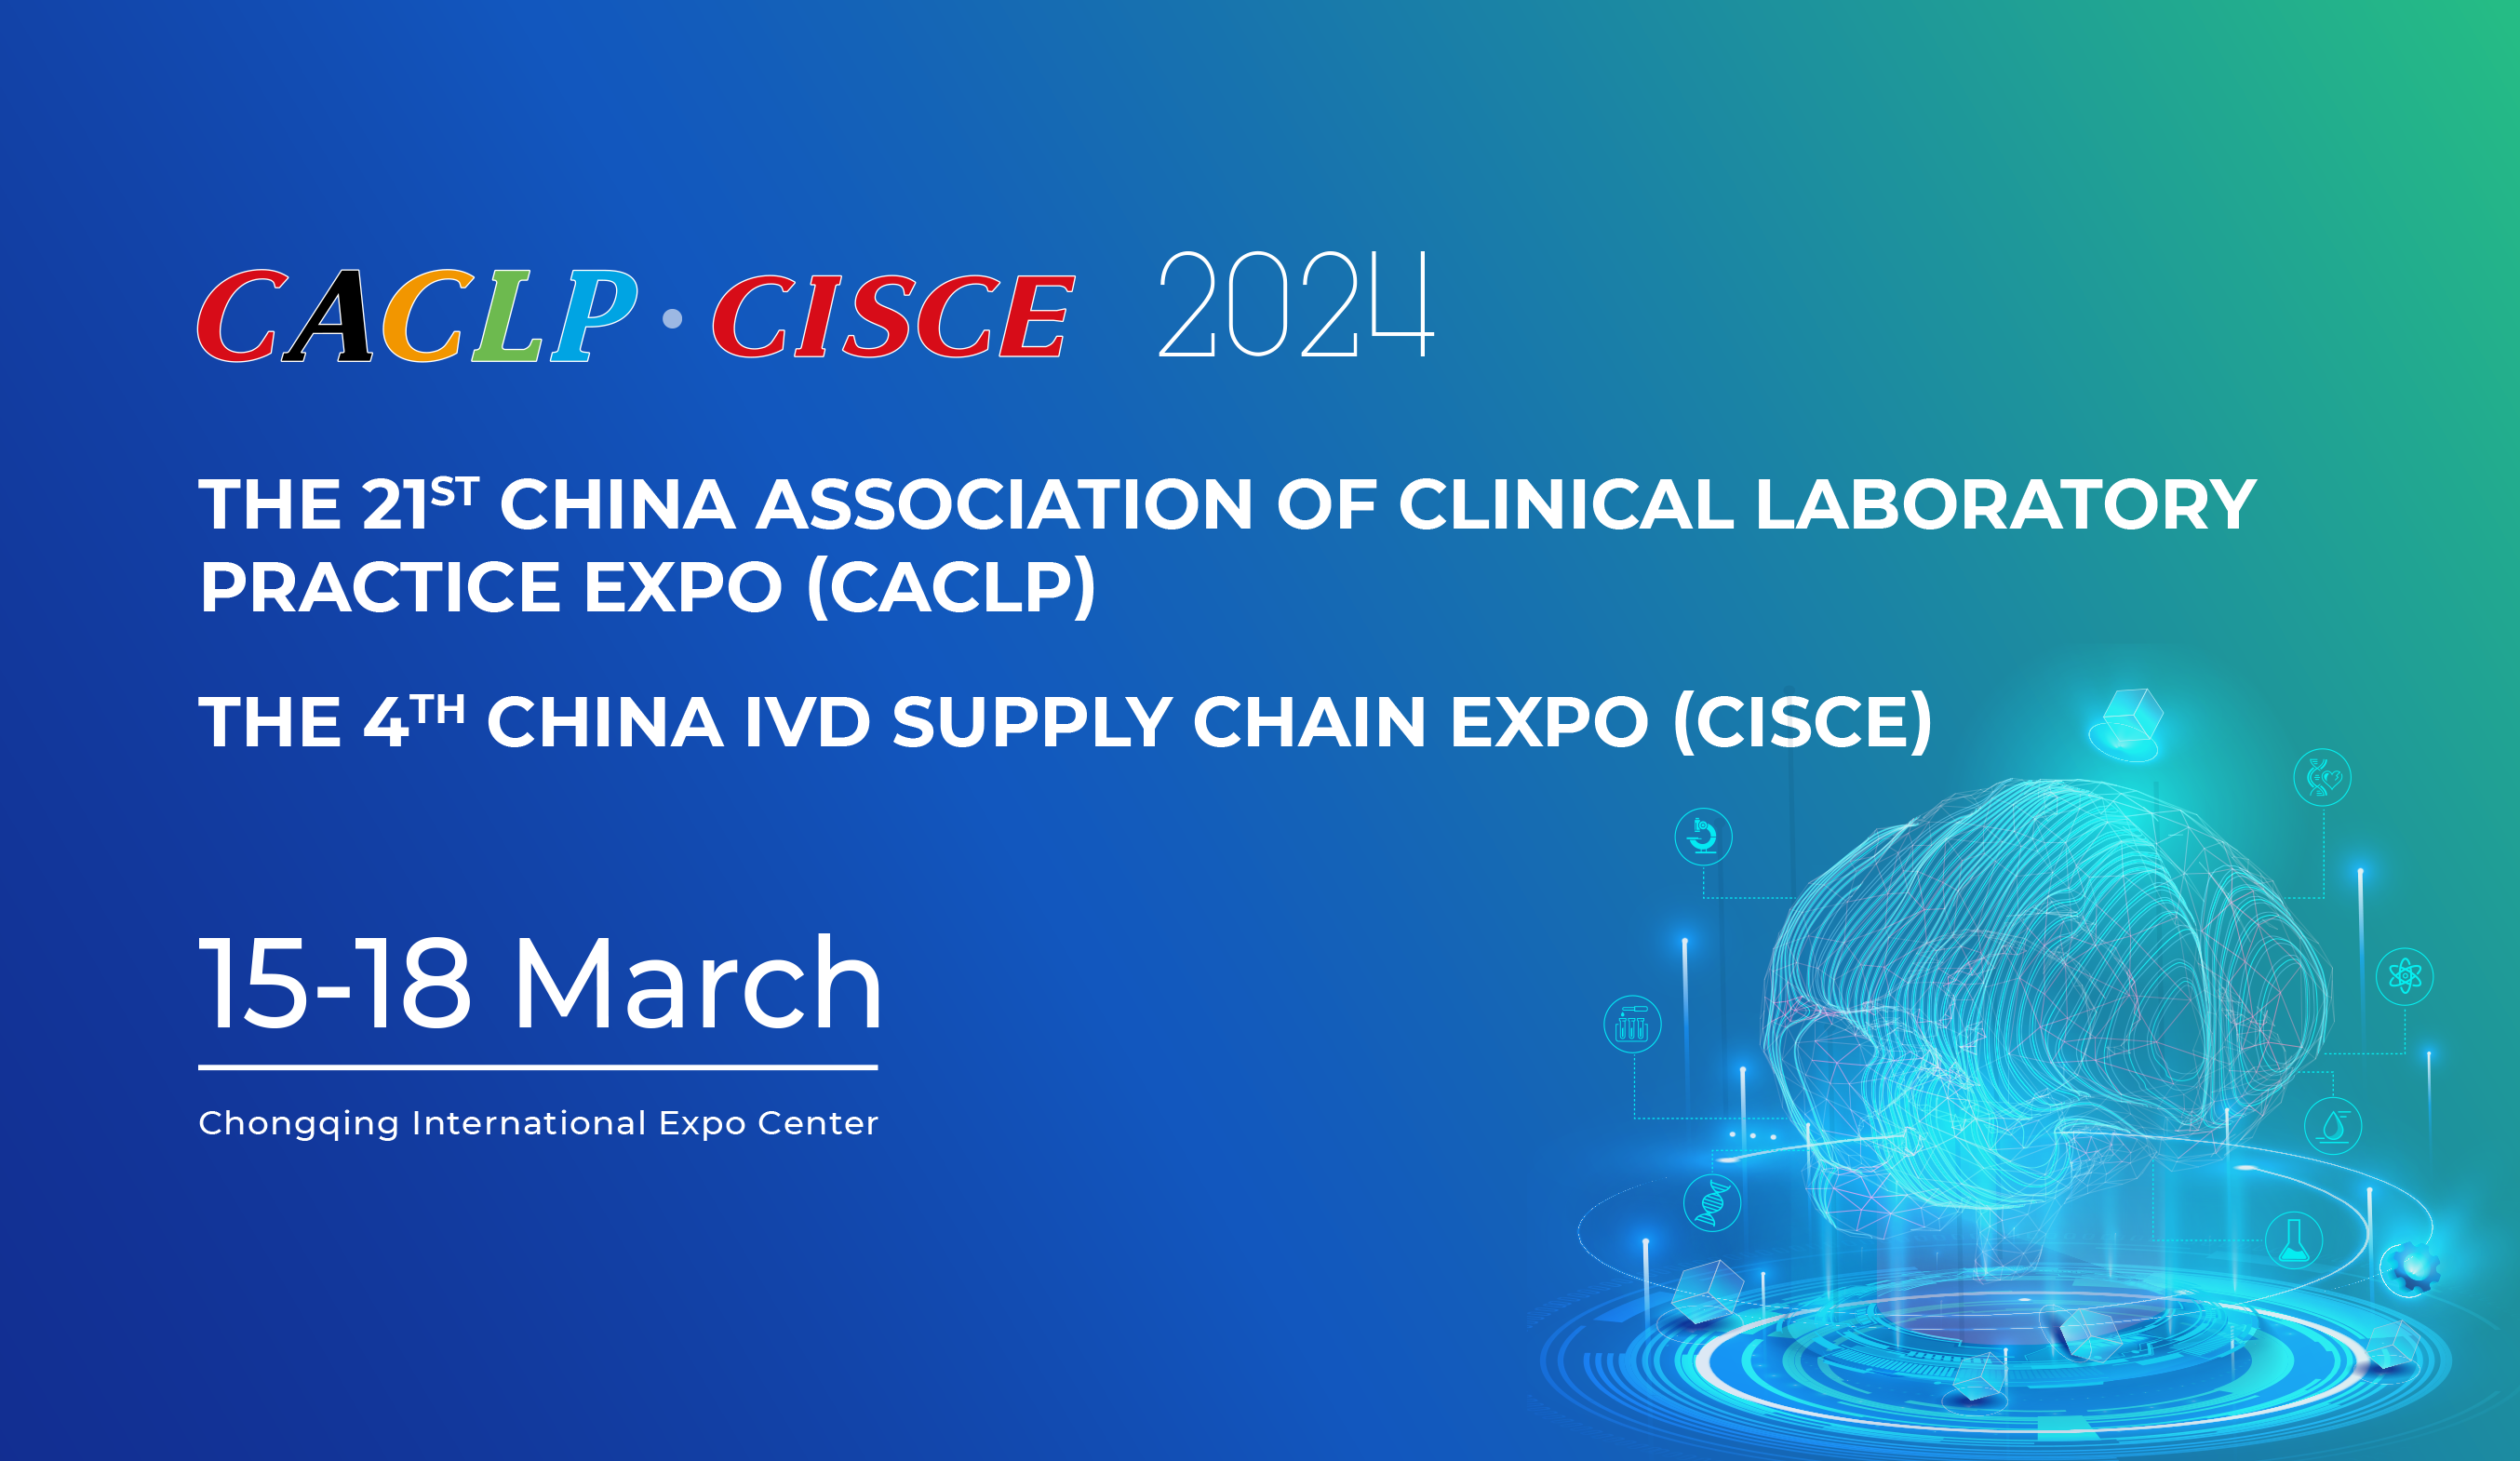 1200+ Global Exhibitors Confirmed Their Participation on the 21st CACLP and 4th CISCE in Chongqing, March 2024